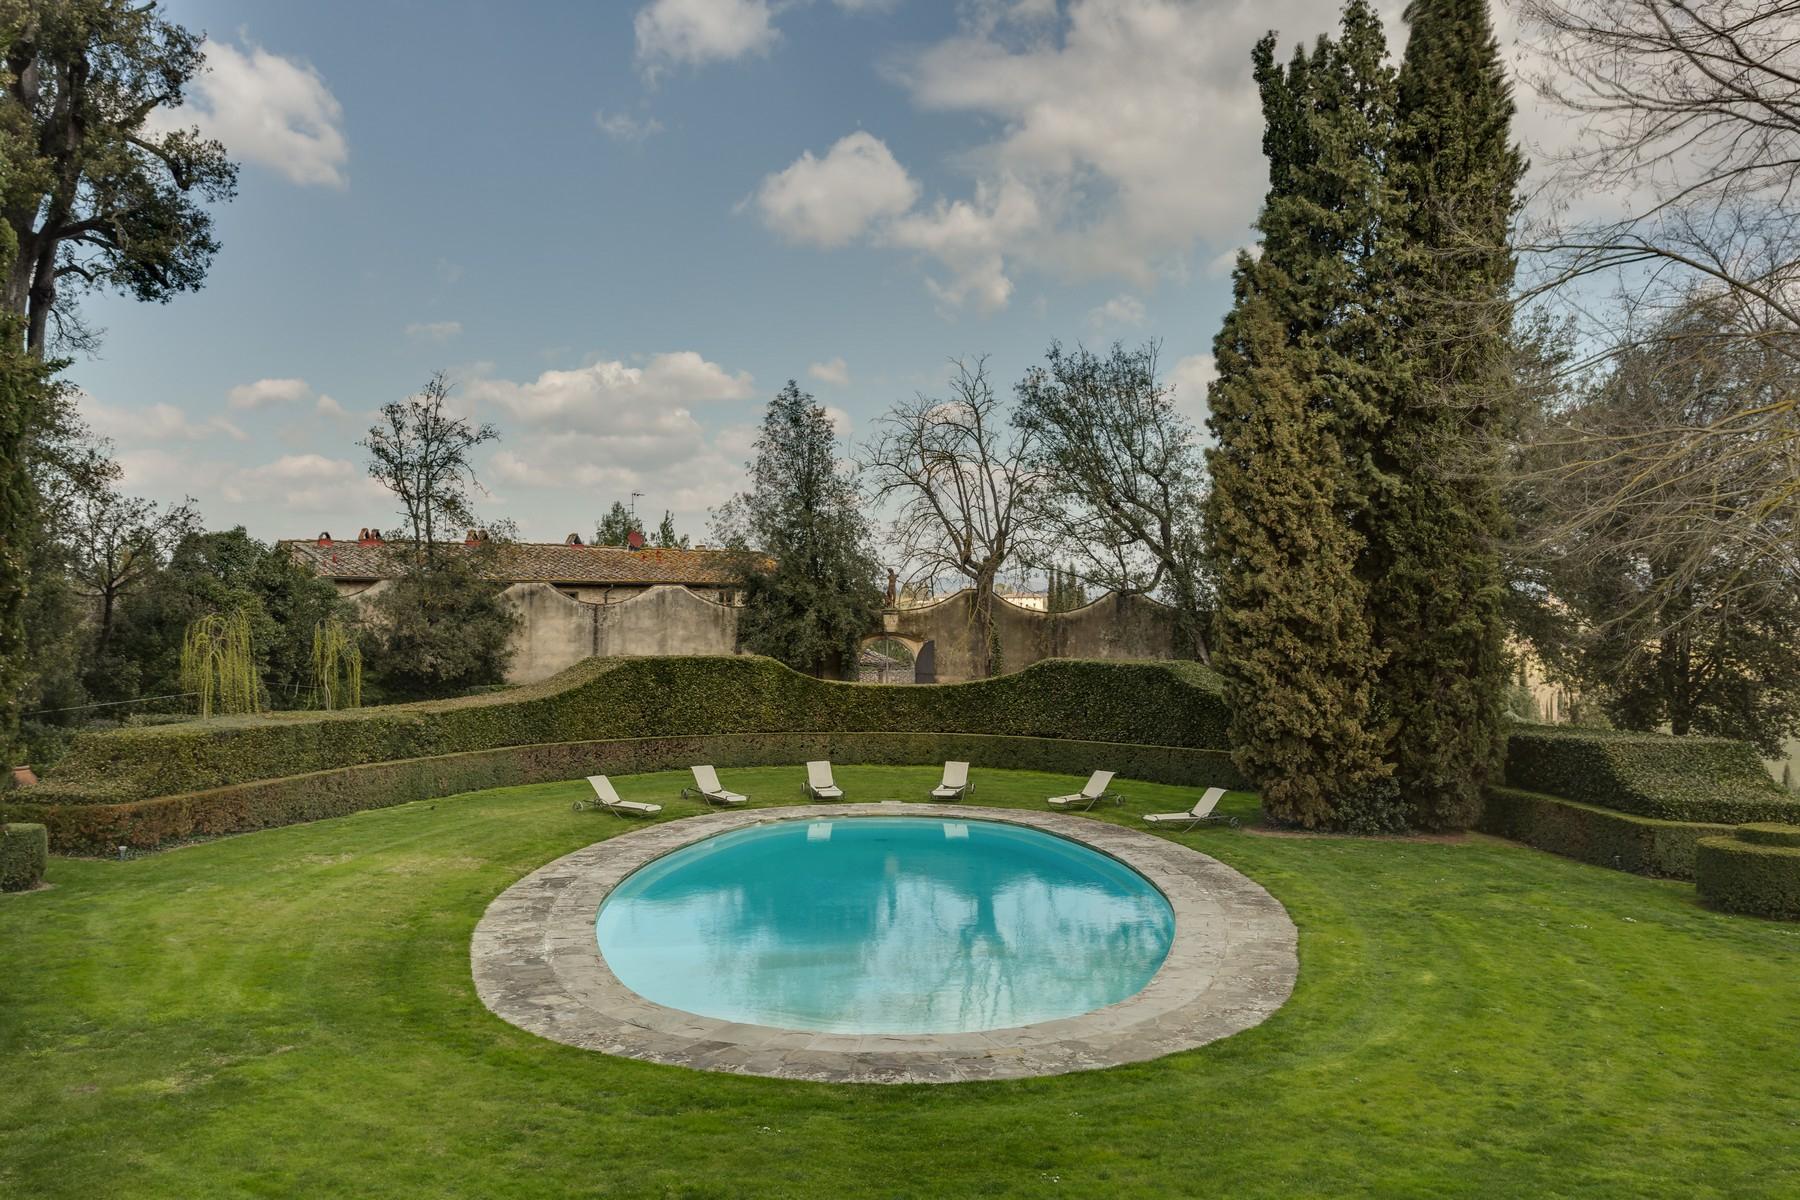 Marvellous Renaissance Villa with pool on the hills of Florence - 41